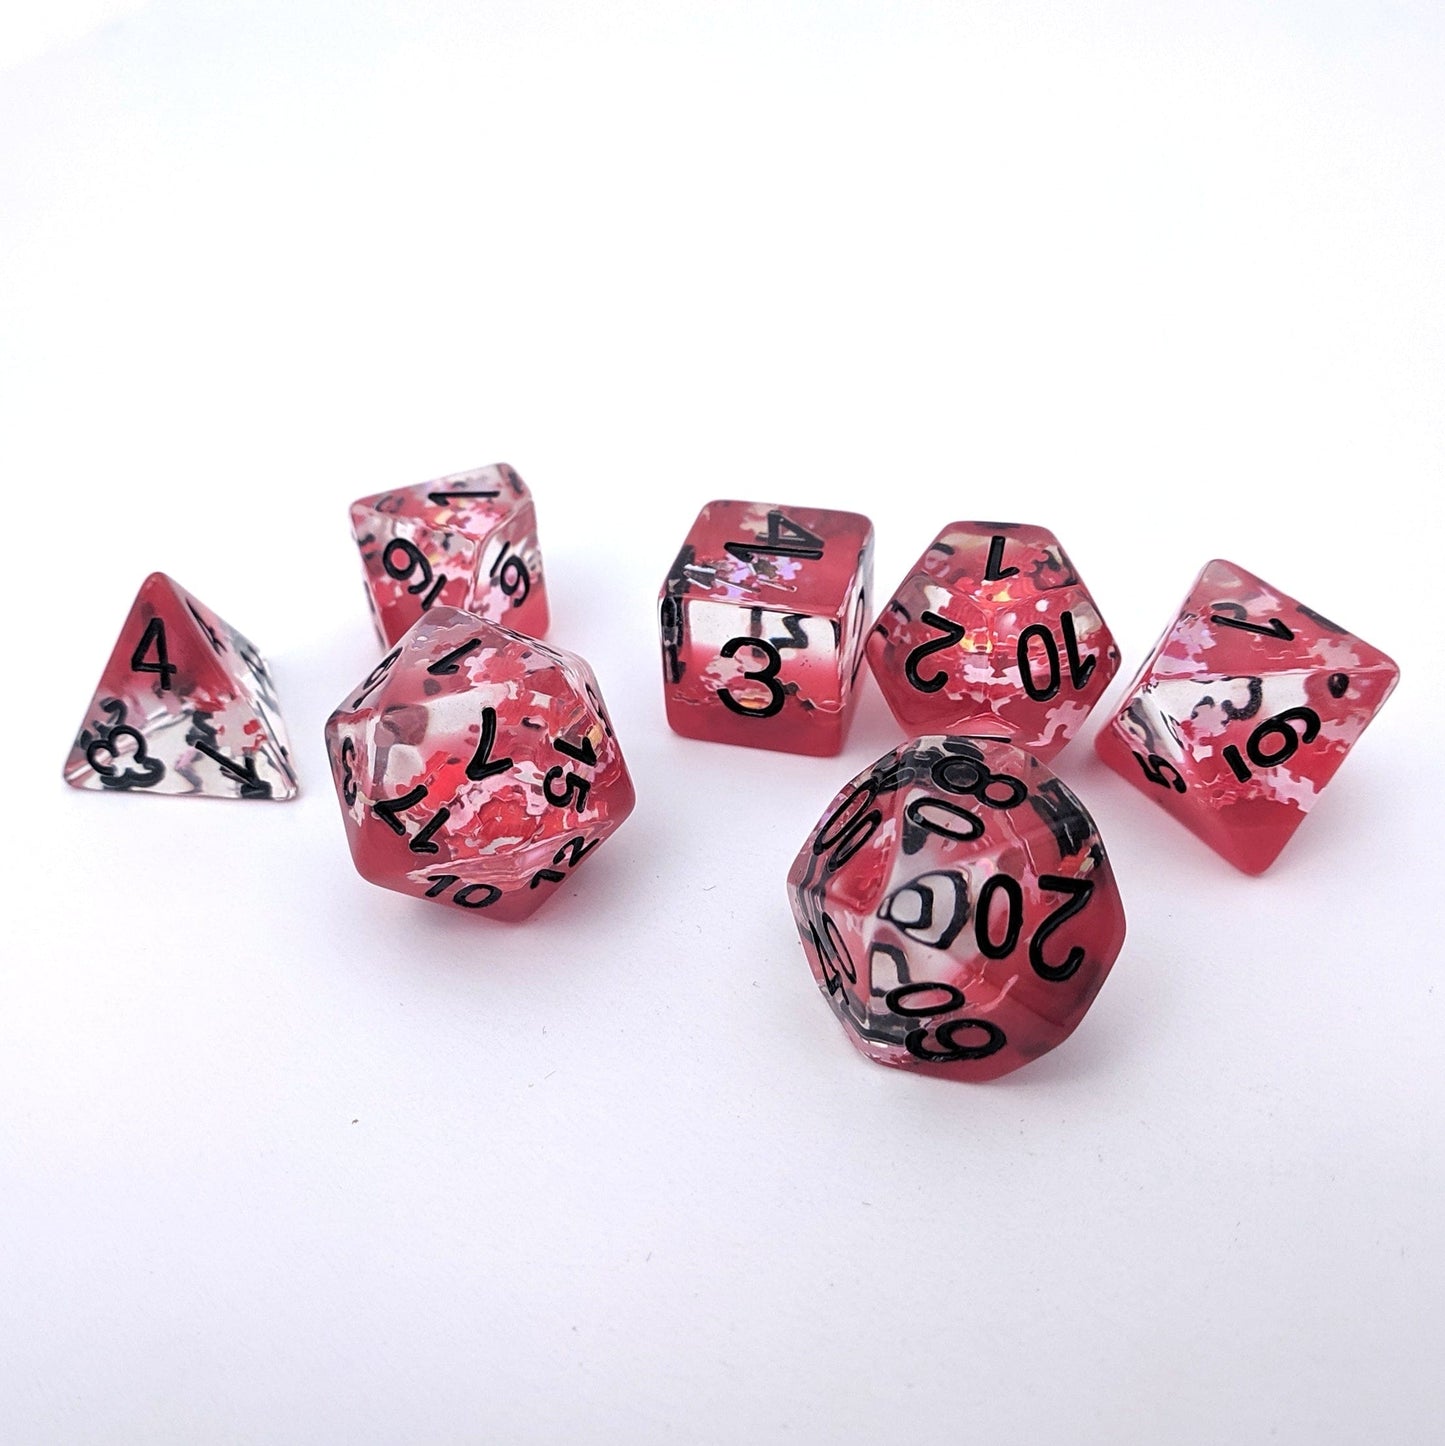 Deadly Puzzle DnD Dice Set, Red Translucent Glitter Dice - CozyGamer